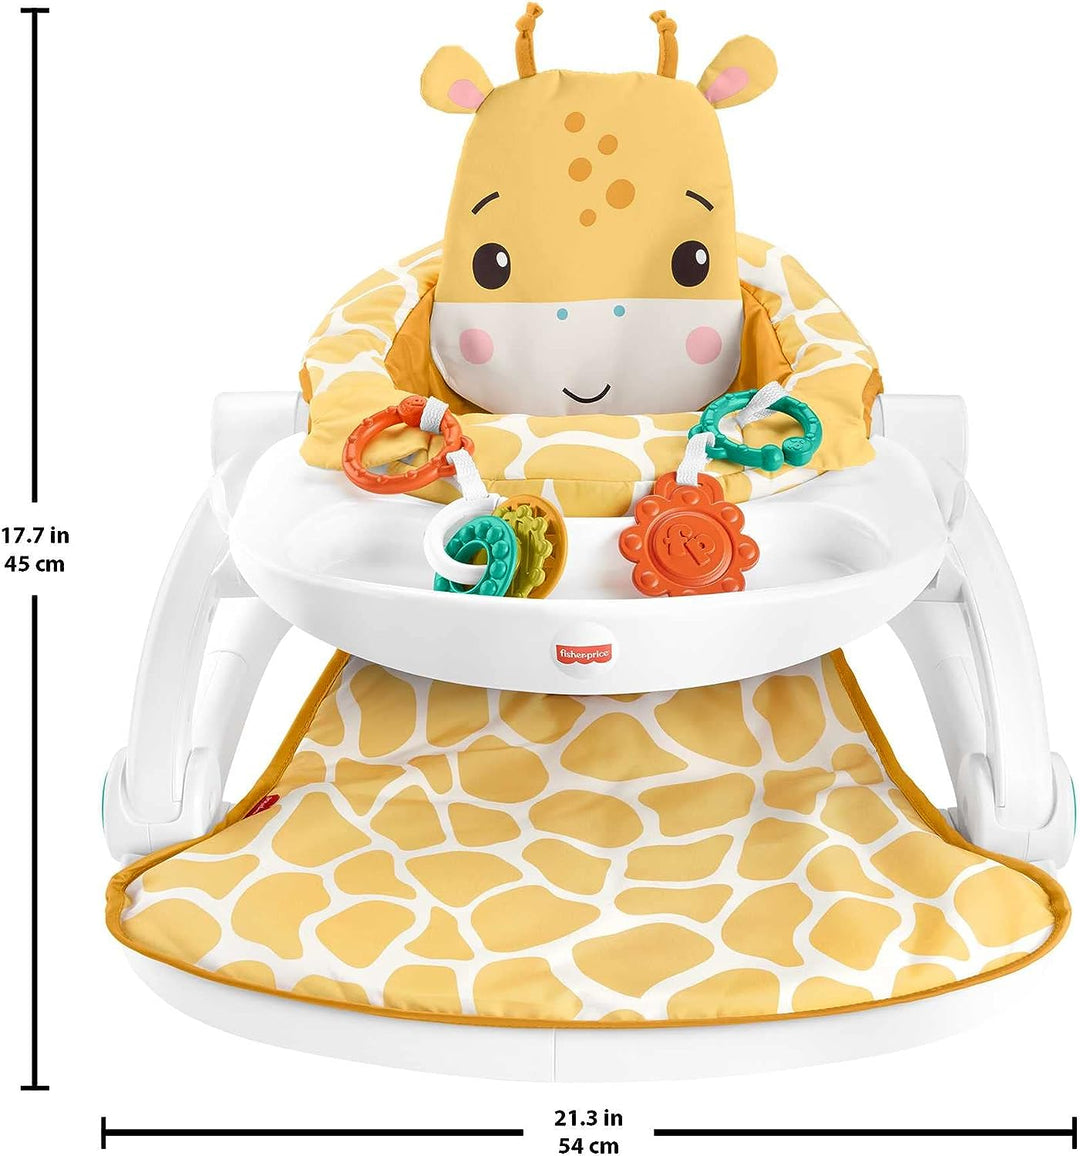 ?Fisher-Price Portable Baby Chair with Snack Tray, BPA-Free Teether and Clacker Toy